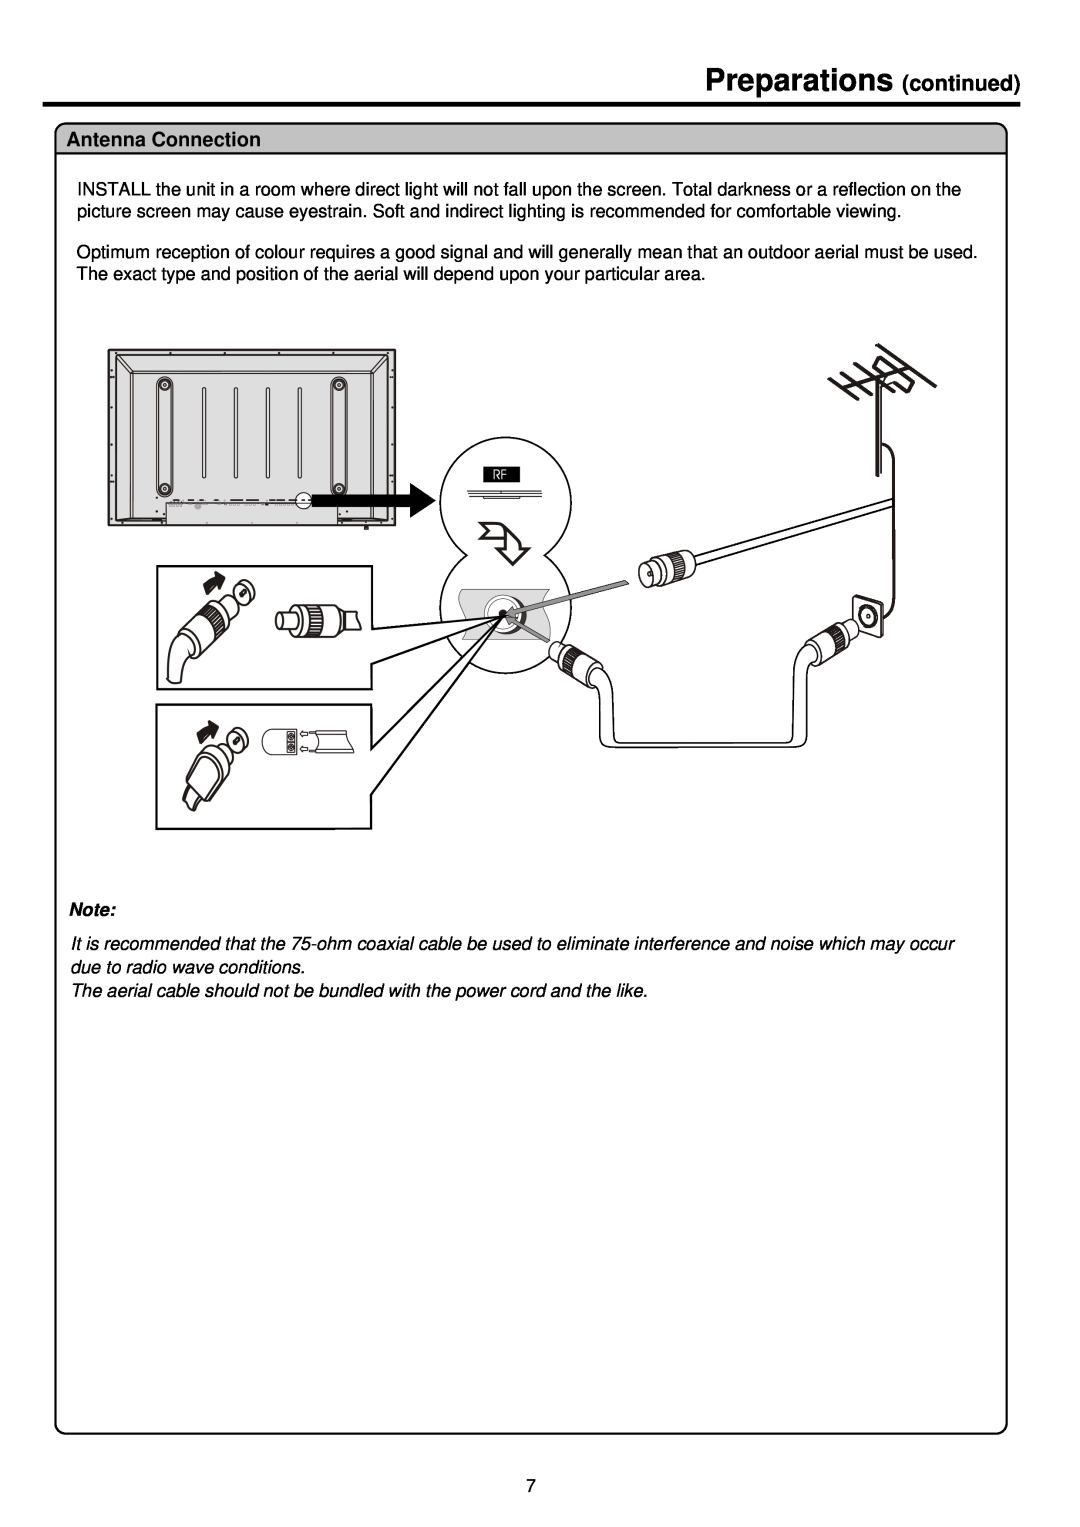 Palsonic PDP4200 owner manual Antenna Connection, Preparations continued 